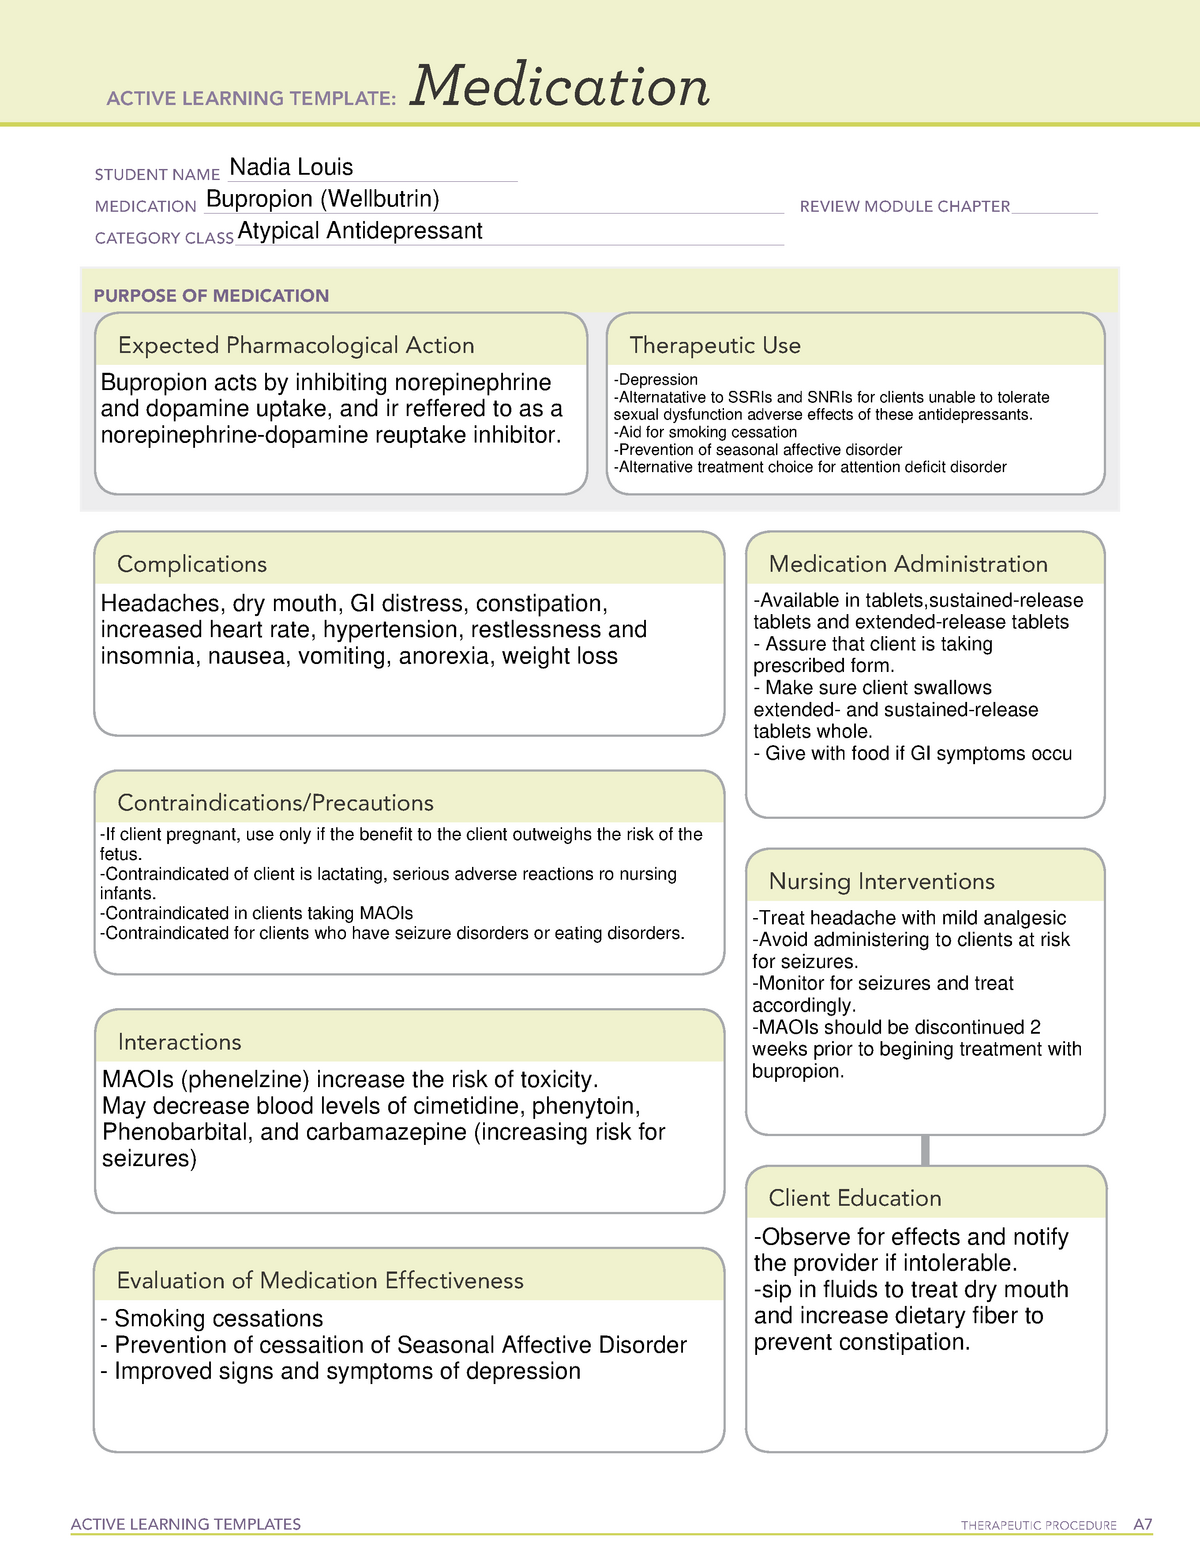 Bupropion Using the ATI Active Learning Medication Template and ATI